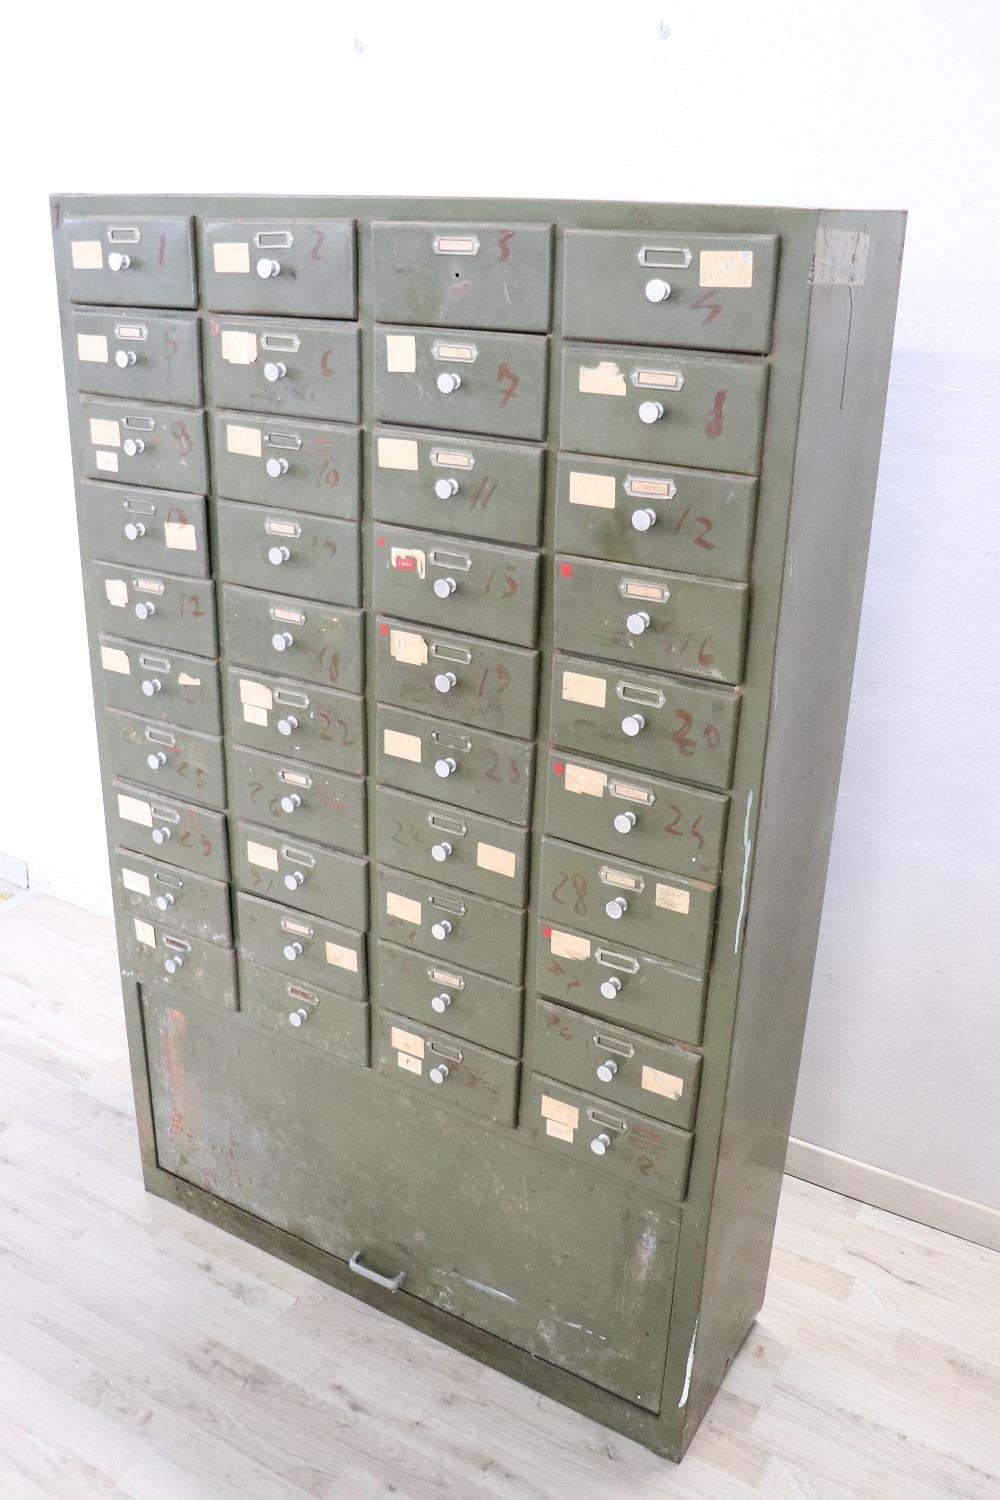 Italian industrial multi drawers metal apothecary cabinet, 1940s. Equipped with forty comfortable drawers. Condition used, one knob is missing.